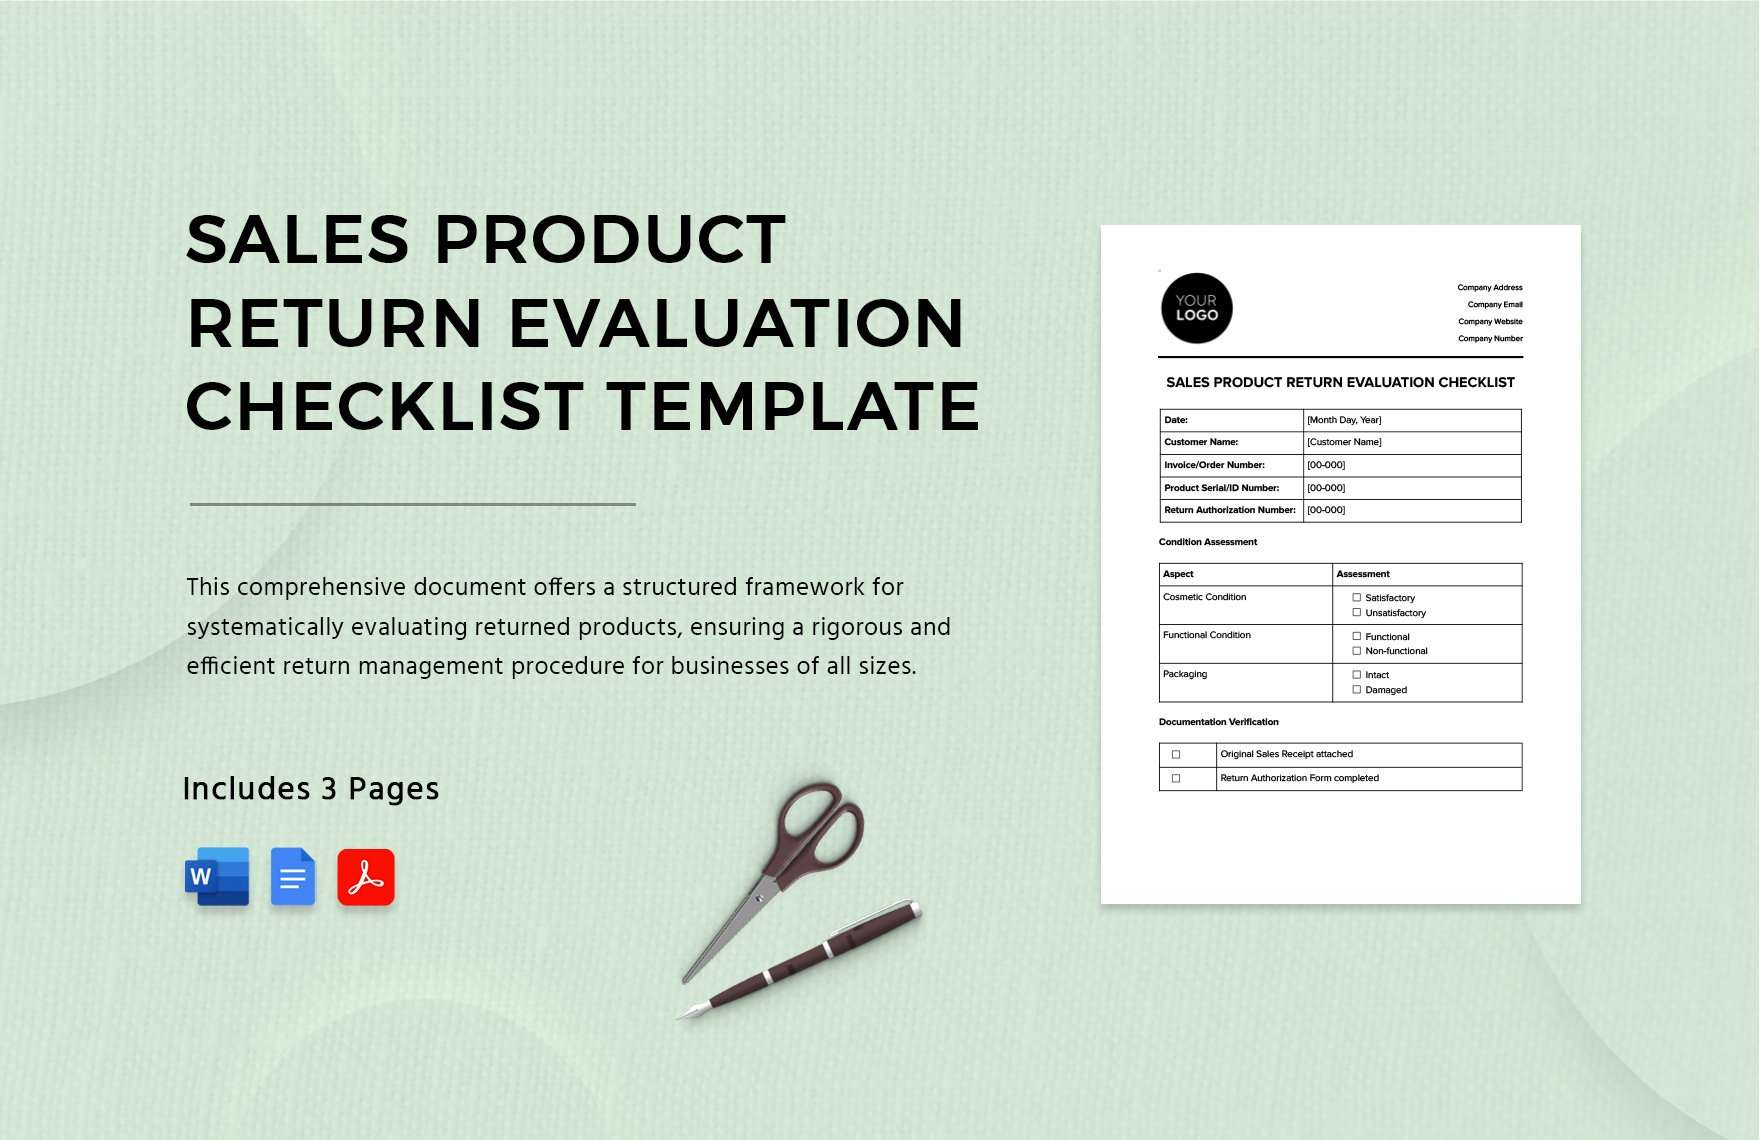 Sales Product Return Evaluation Checklist Template in Word, Google Docs, PDF